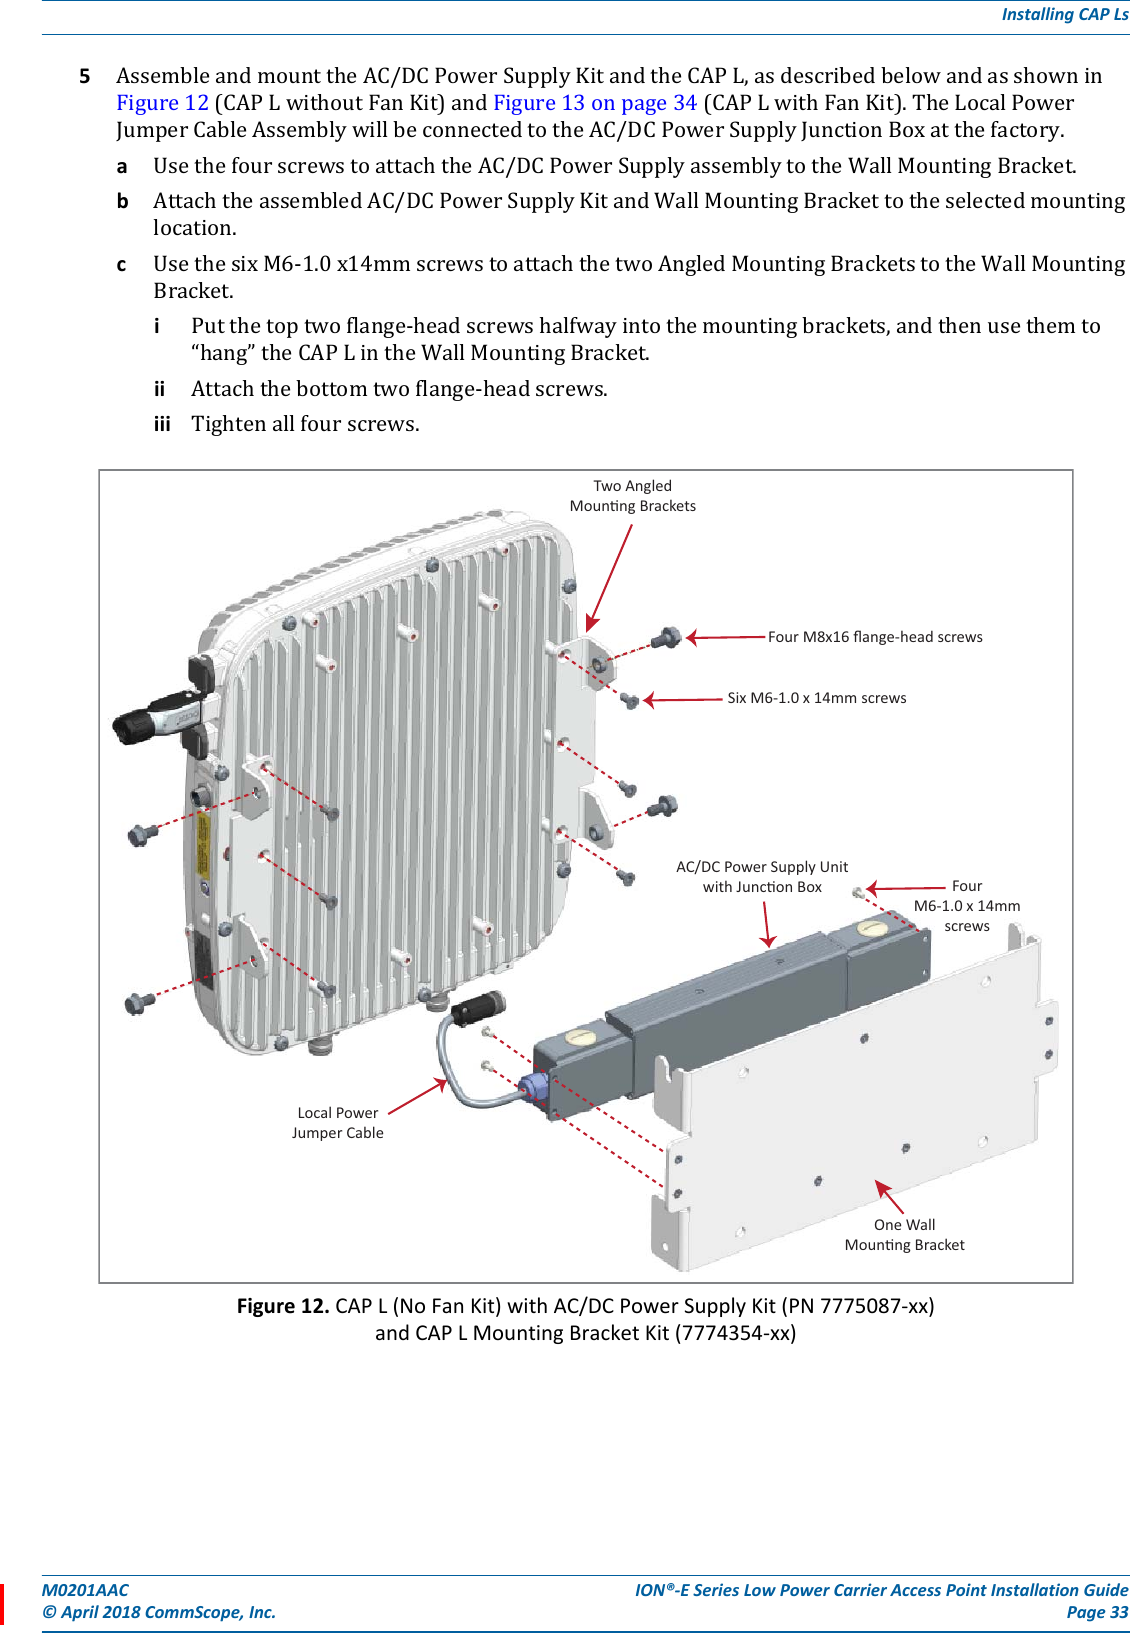 M0201AAC ION®-E Series Low Power Carrier Access Point Installation Guide© April 2018 CommScope, Inc. Page 33Installing CAP Ls5AssembleandmounttheAC/DCPowerSupplyKitandtheCAPL,asdescribedbelowandasshowninFigure12(CAPLwithoutFanKit)andFigure13onpage34(CAPLwithFanKit).TheLocalPowerJumperCableAssemblywillbeconnectedtotheAC/DCPowerSupplyJunctionBoxatthefactory.aUsethefourscrewstoattachtheAC/DCPowerSupplyassemblytotheWallMountingBracket.bAttachtheassembledAC/DCPowerSupplyKitandWallMountingBrackettotheselectedmountinglocation.cUsethesixM6-1.0x14mmscrewstoattachthetwoAngledMountingBracketstotheWallMountingBracket.iPutthetoptwoflange-headscrewshalfwayintothemountingbrackets,andthenusethemto“hang”theCAPLintheWallMountingBracket.ii Attachthebottomtwoflange-headscrews.iii Tightenallfourscrews.Figure 12. CAP L (No Fan Kit) with AC/DC Power Supply Kit (PN 7775087-xx)and CAP L Mounting Bracket Kit (7774354-xx)Two AngledMounng BracketsFour M8x16 ﬂange-head screwsSix M6-1.0 x 14mm screwsFourM6-1.0 x 14mmscrewsOne WallMounng BracketAC/DC Power Supply Unitwith Juncon BoxLocal PowerJumper Cable